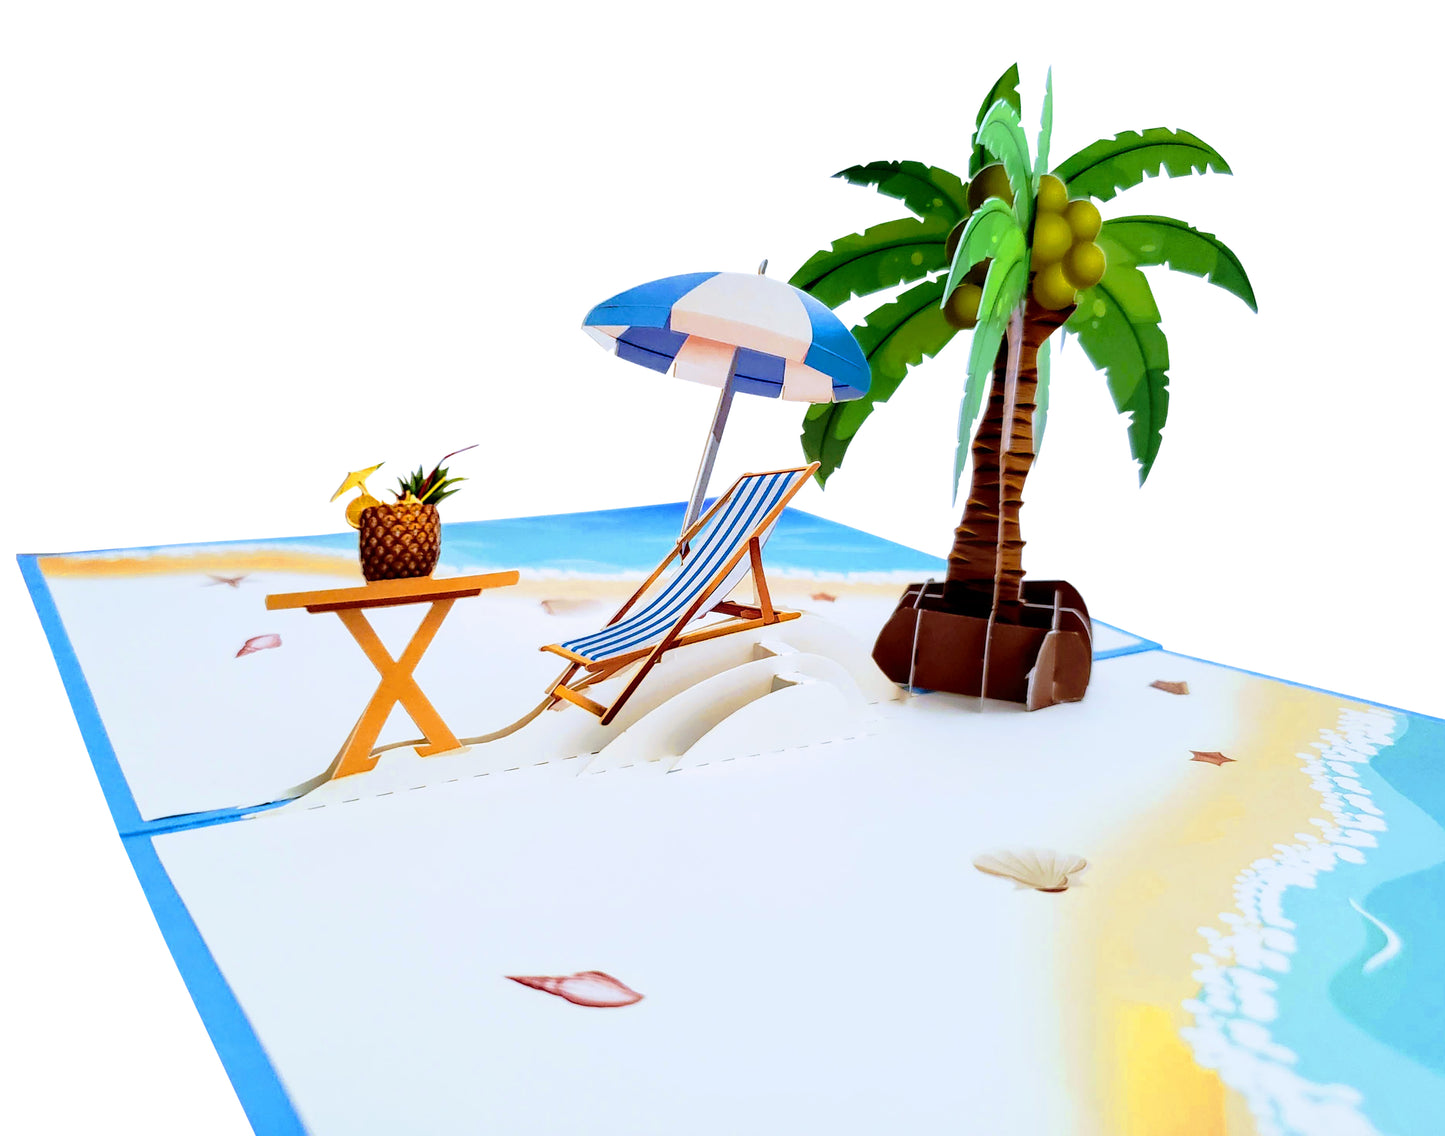 Oceanfront 3D Pop Up Greeting Card - Admin Assistant Day - Bon Voyage - Father's Day - Just Because - iGifts And Cards